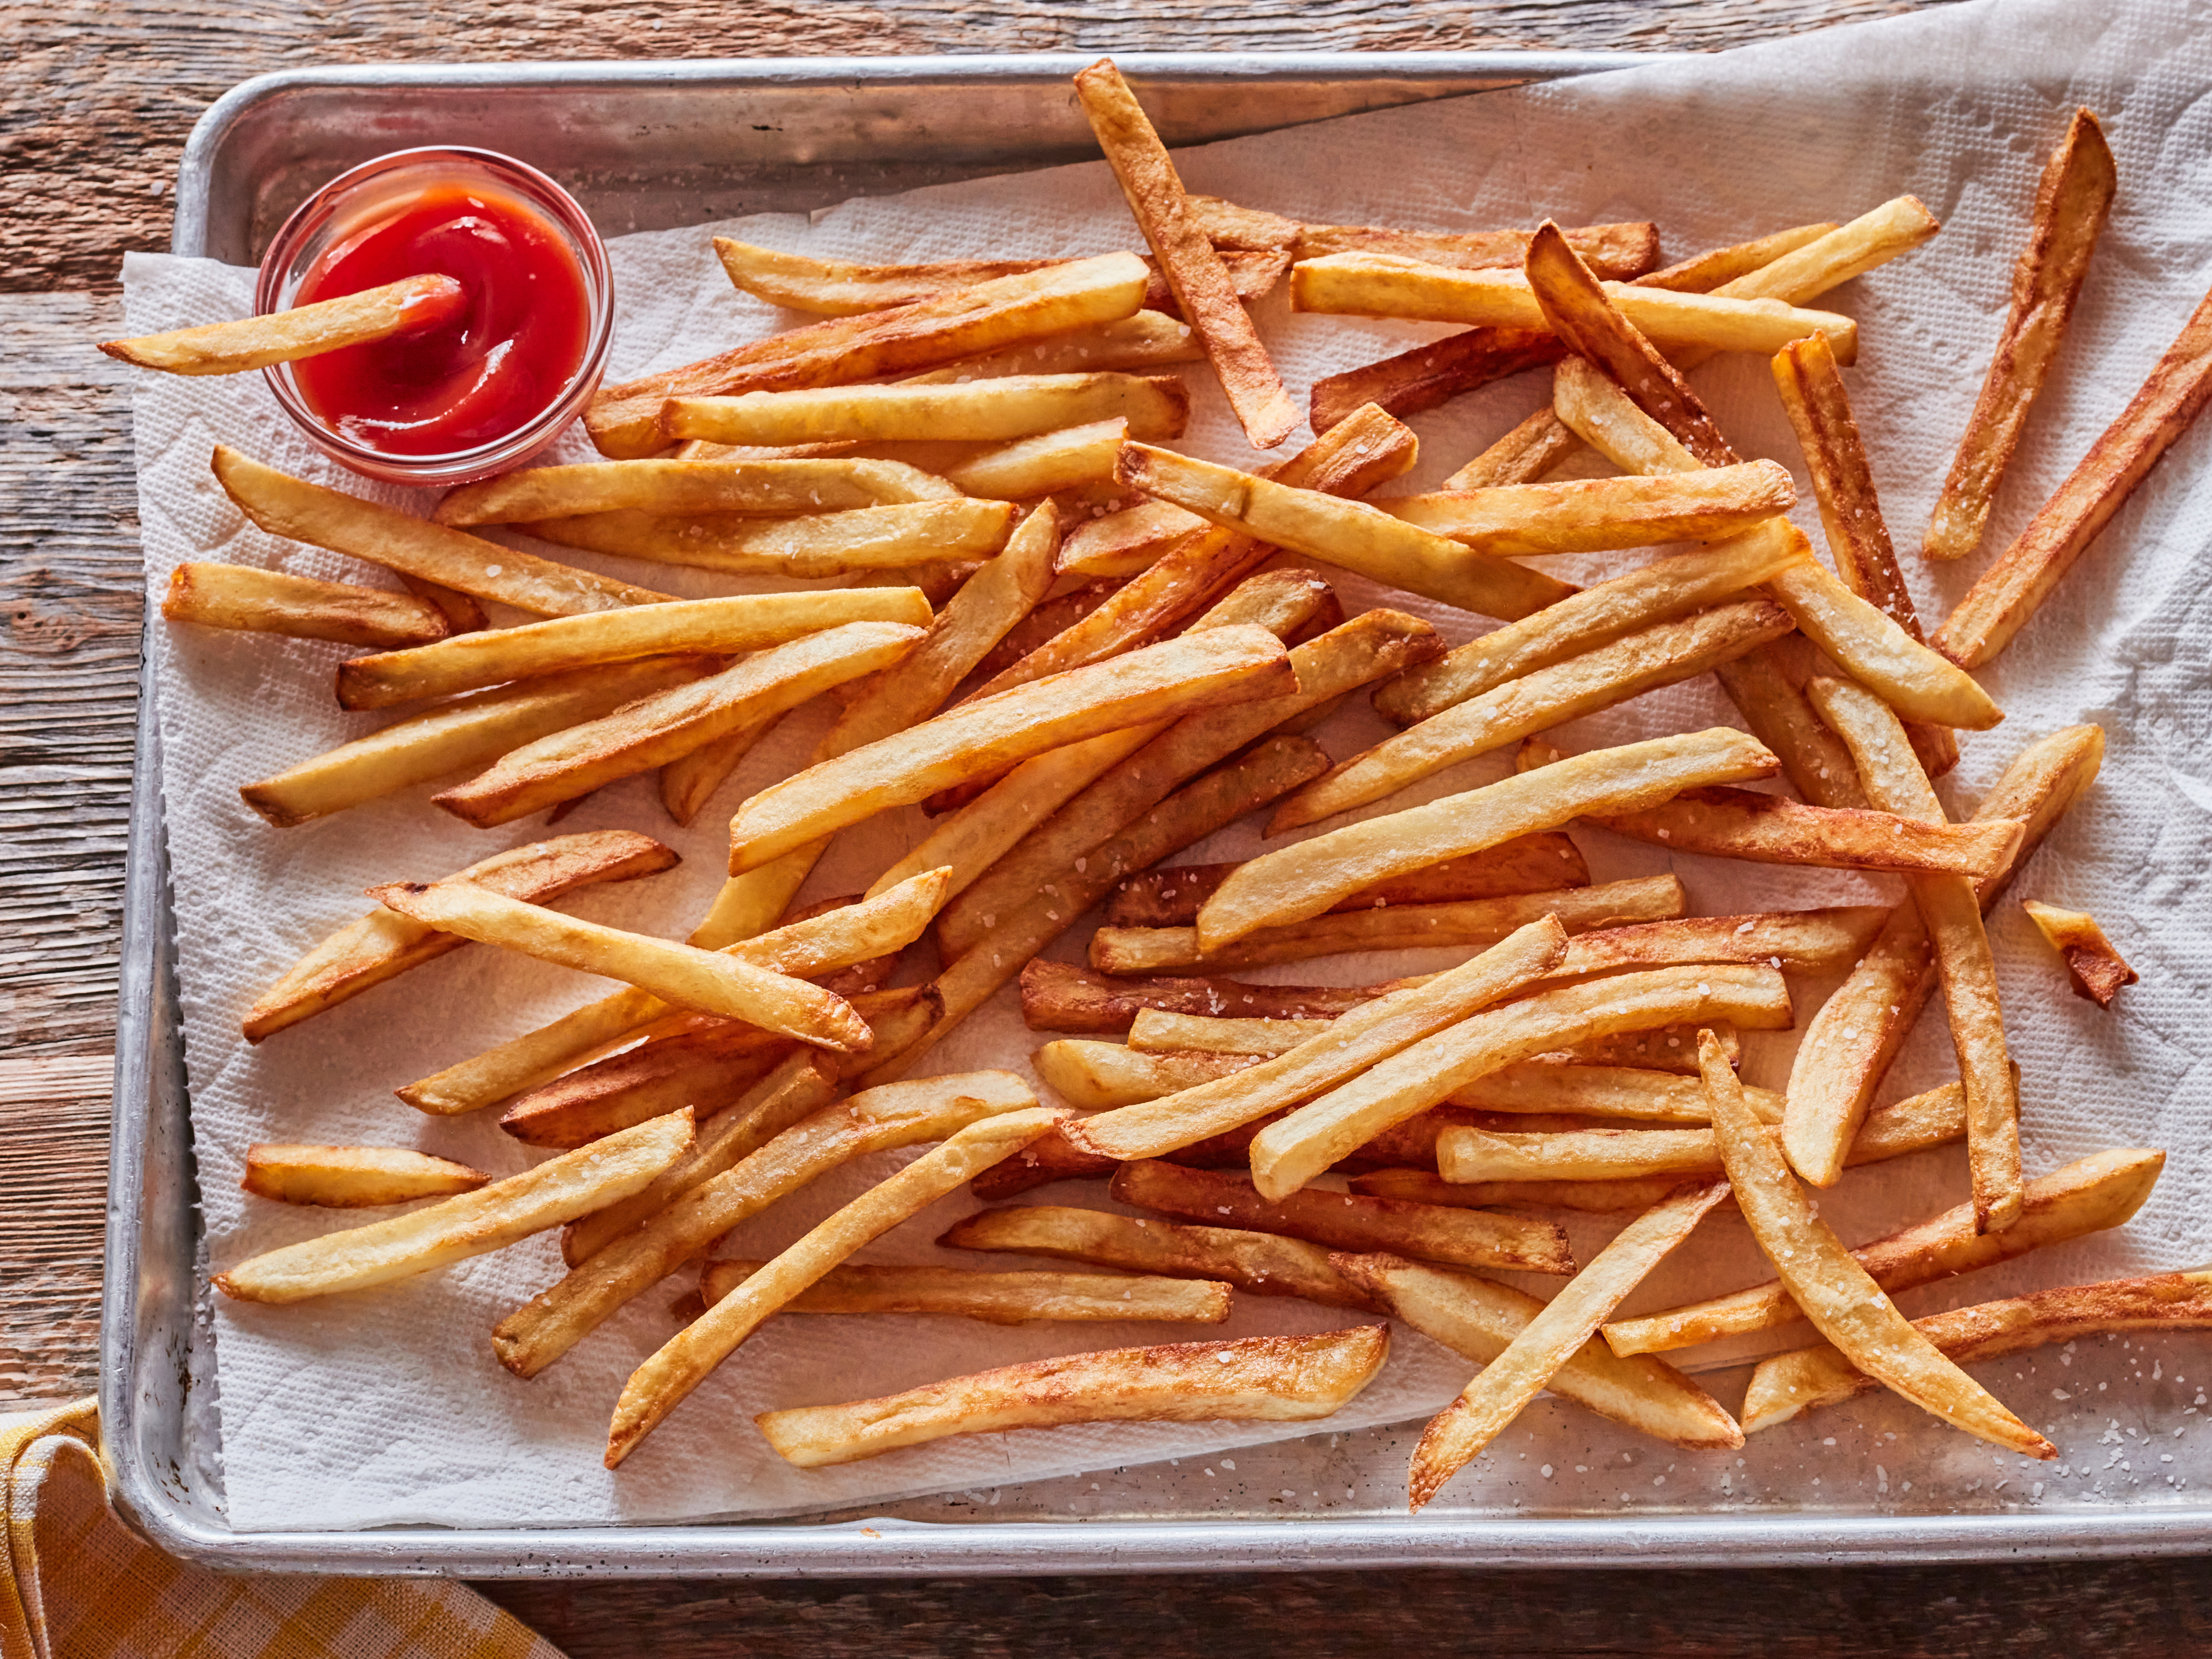 https://www.foodnetwork.com/content/dam/images/food/fullset/2012/9/5/1/WU0306H_perfect-french-fries_s4x3.jpg